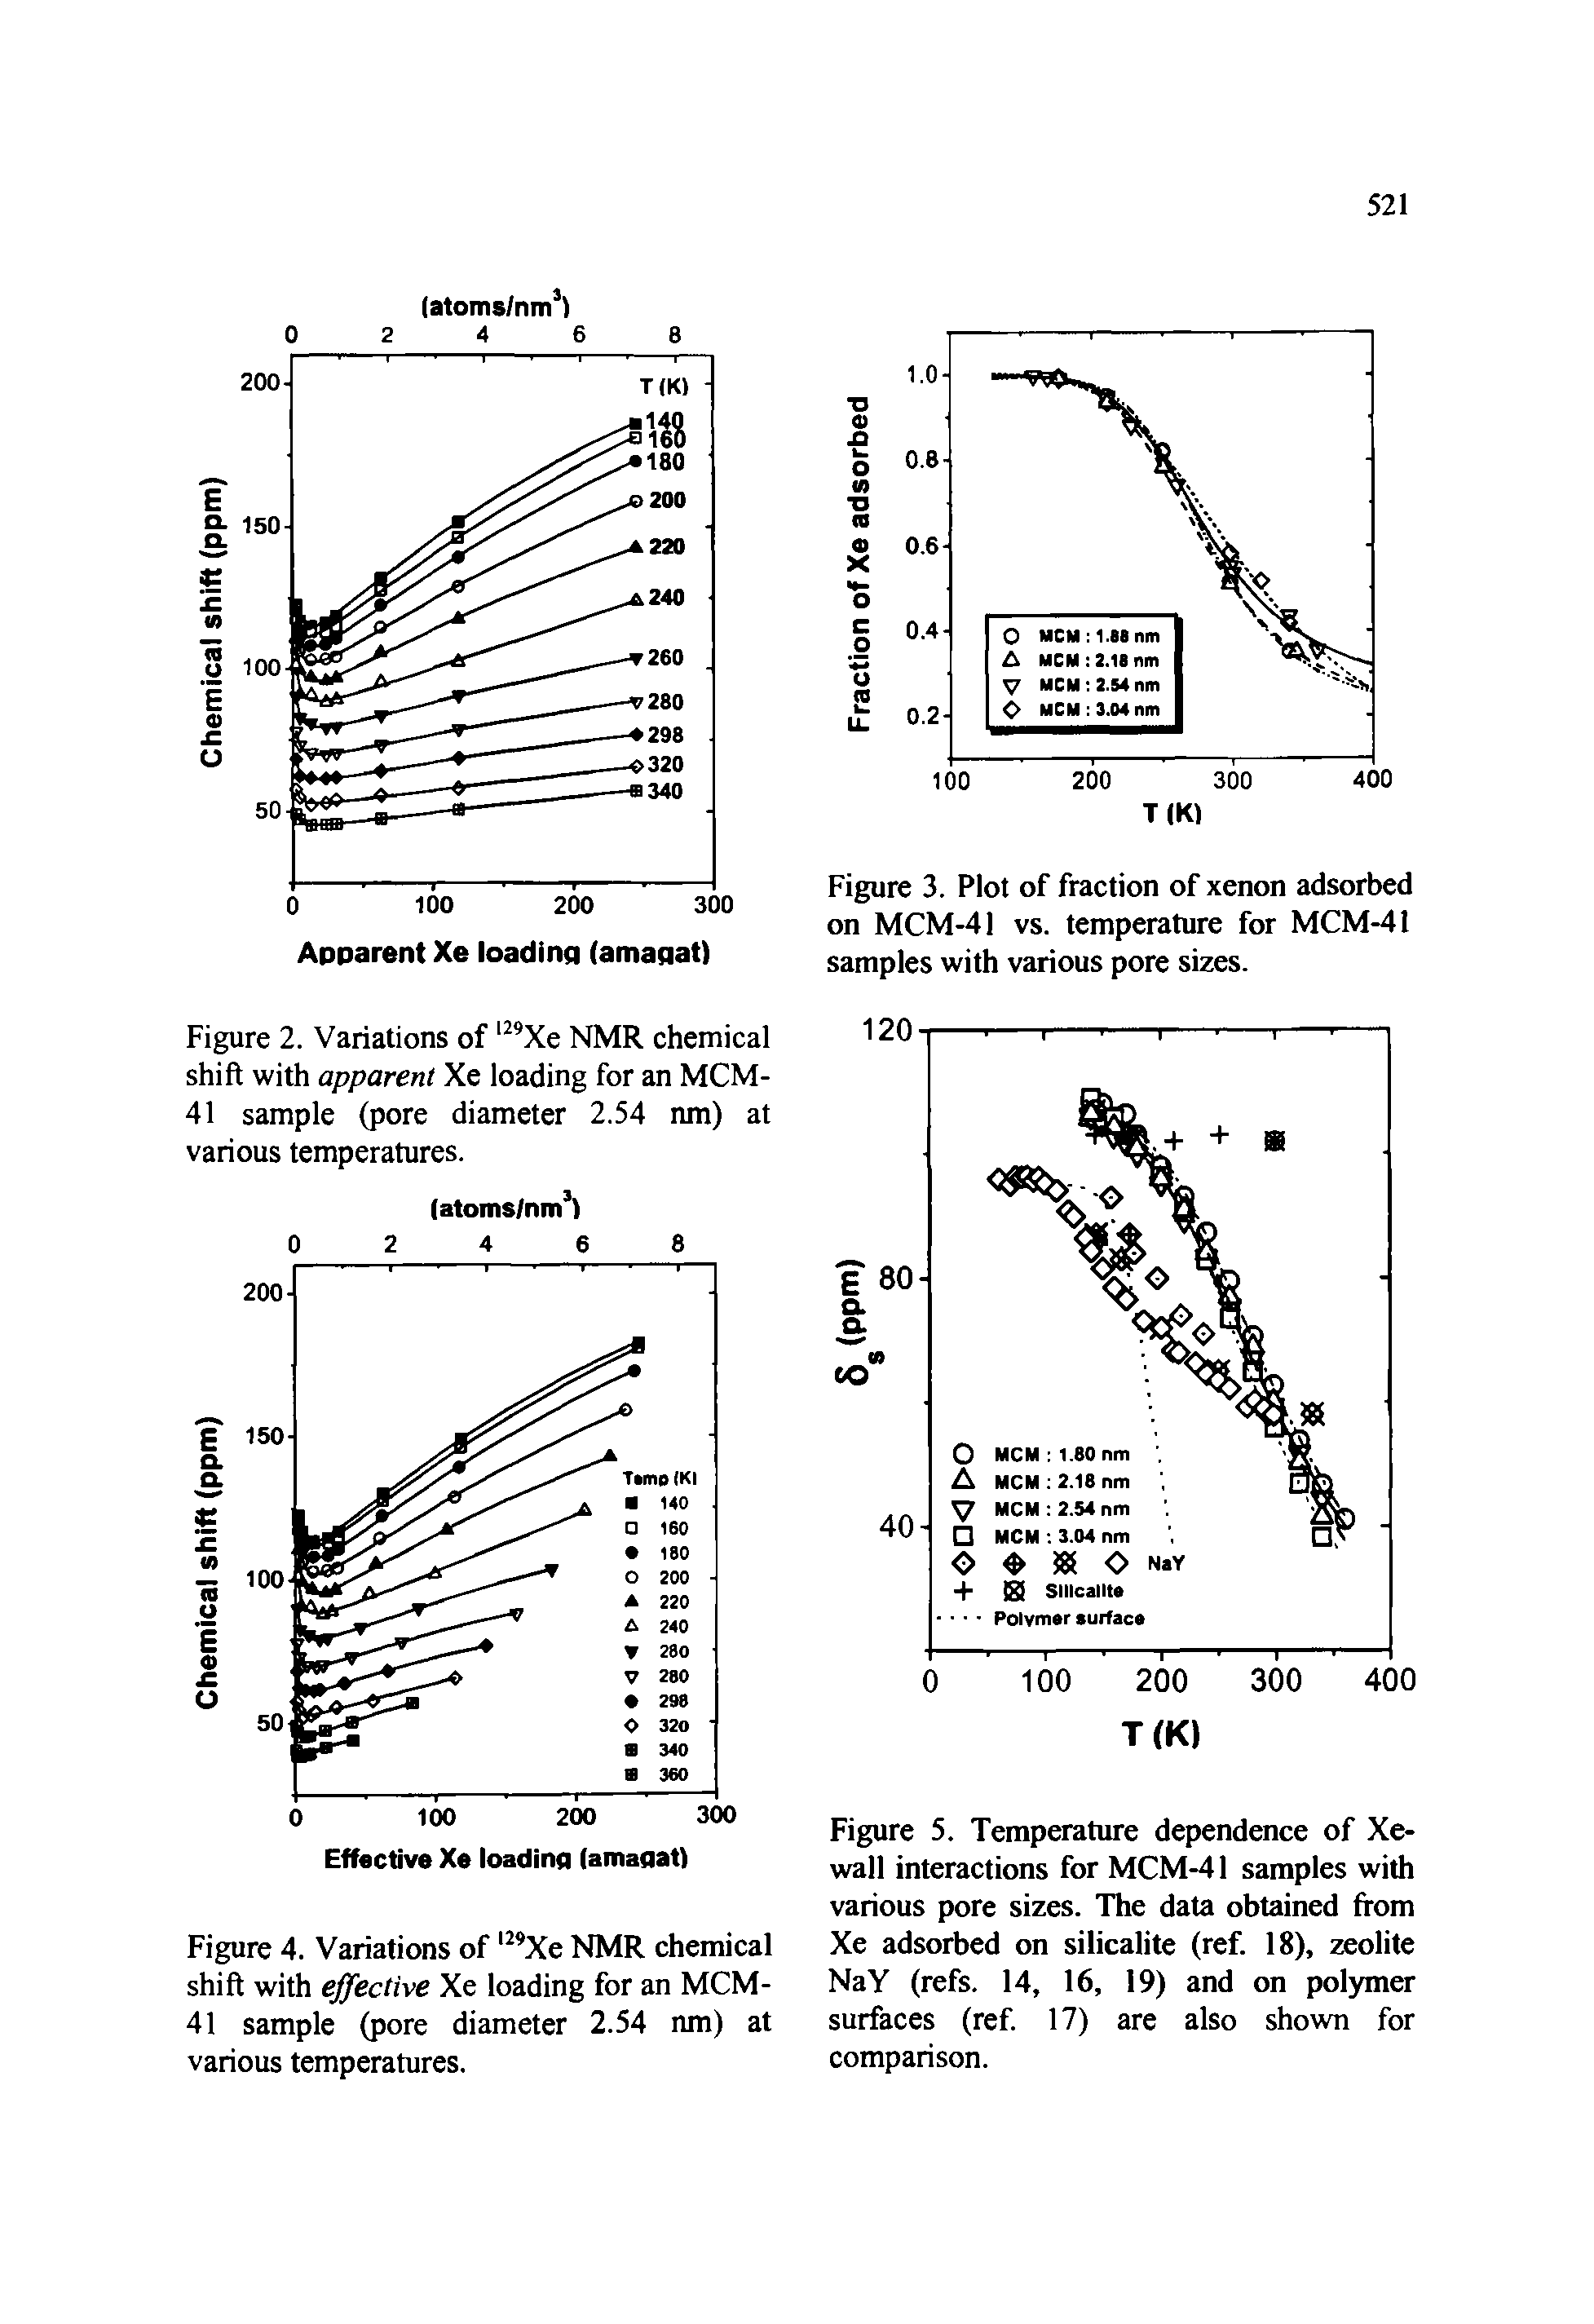 Figure 2. Variations of l29Xe NMR chemical shift with apparent Xe loading for an MCM-41 sample (pore diameter 2.54 nm) at various temperatures.